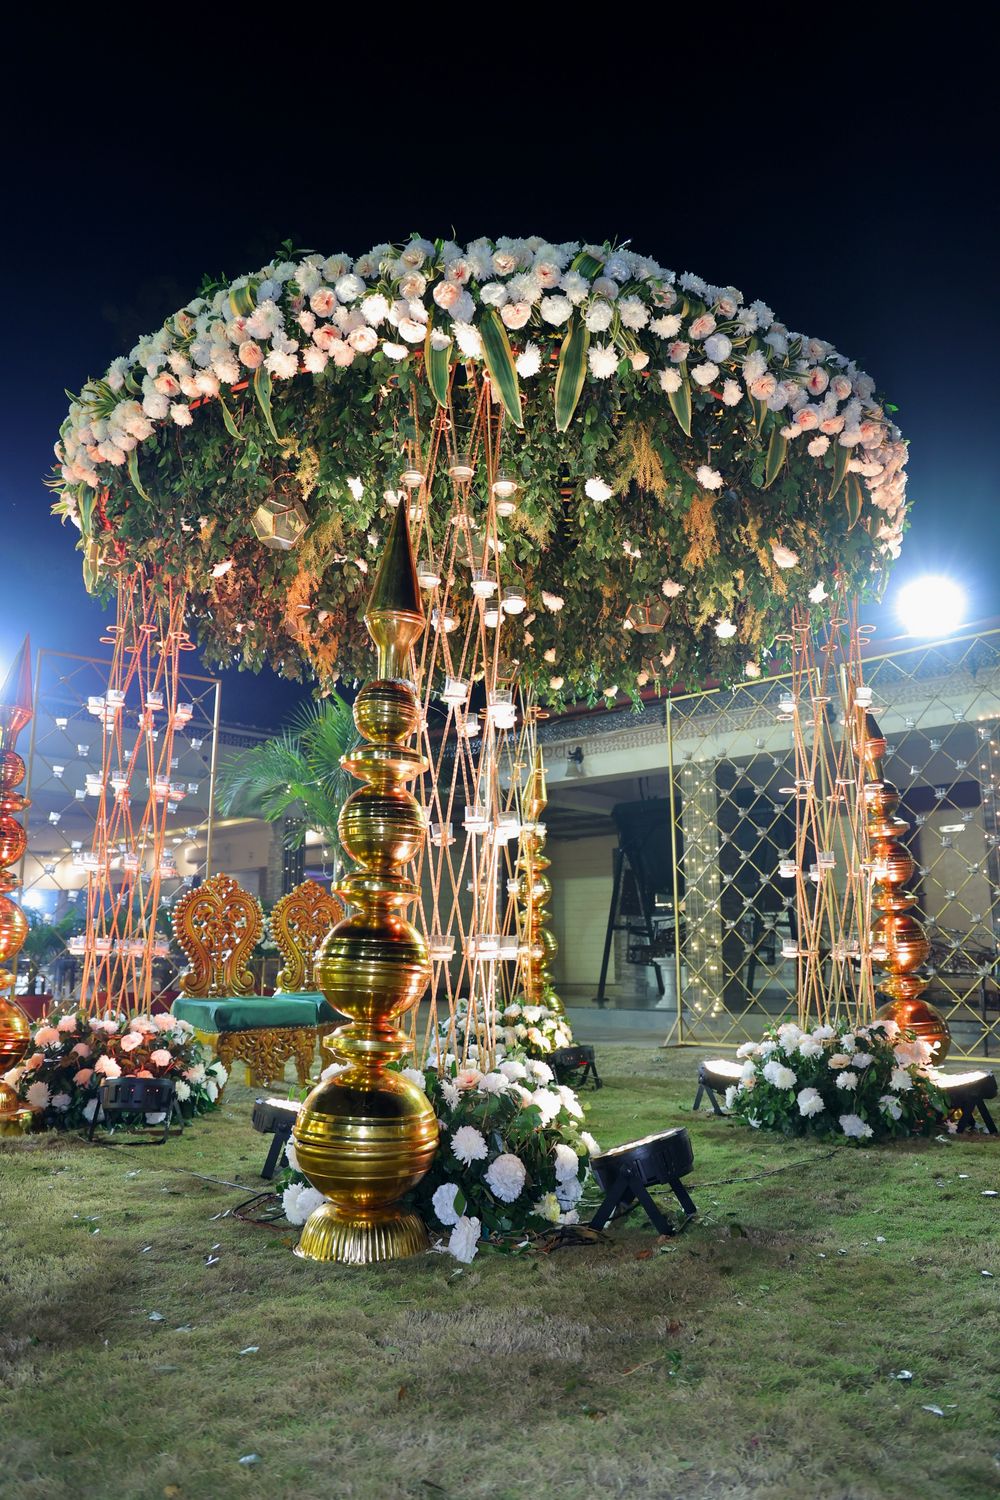 Photo From Shweta weds Bhushan  - By The Decor Inc.